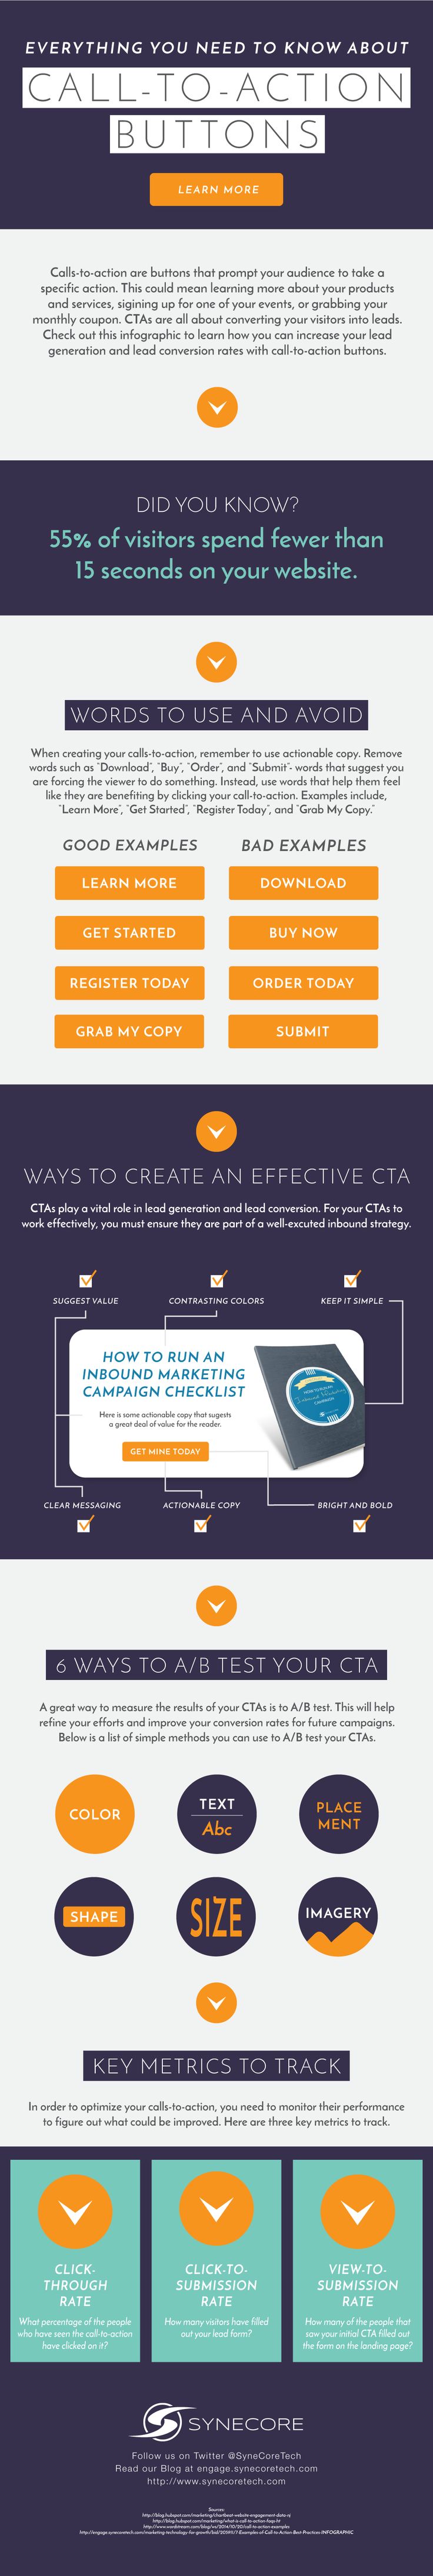 Digital-Marketing-Everything-You-Need-to-Know-About-Call-to-Action-Buttons-INFOGRAPHIC Digital Marketing : Everything You Need to Know About Call-to-Action Buttons [INFOGRAPHIC]